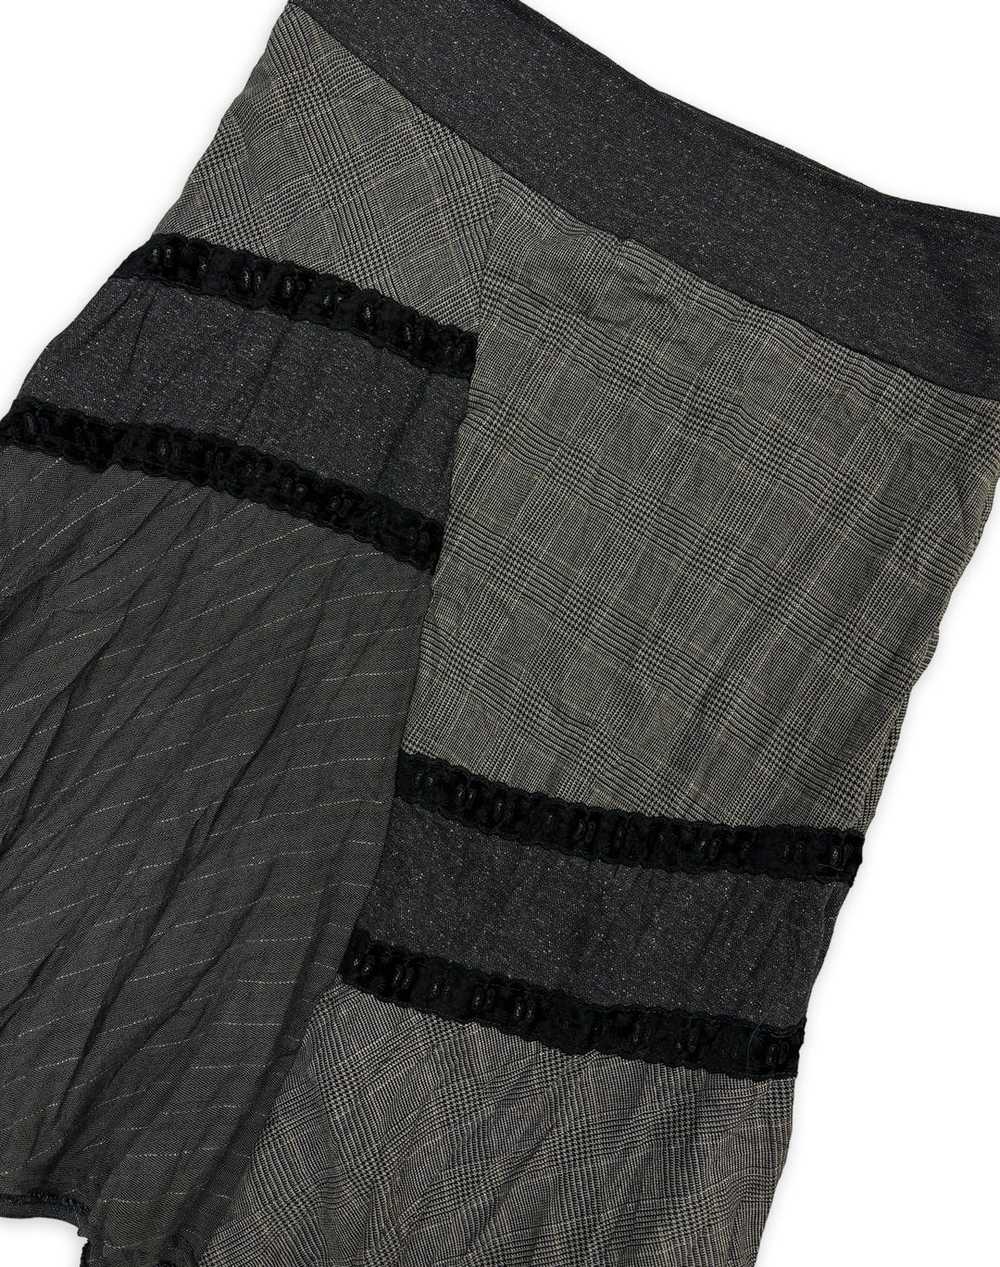 GREY HOUNDSTOOTH AND PINSTRIPE MIDI SKIRT (W38) - image 3